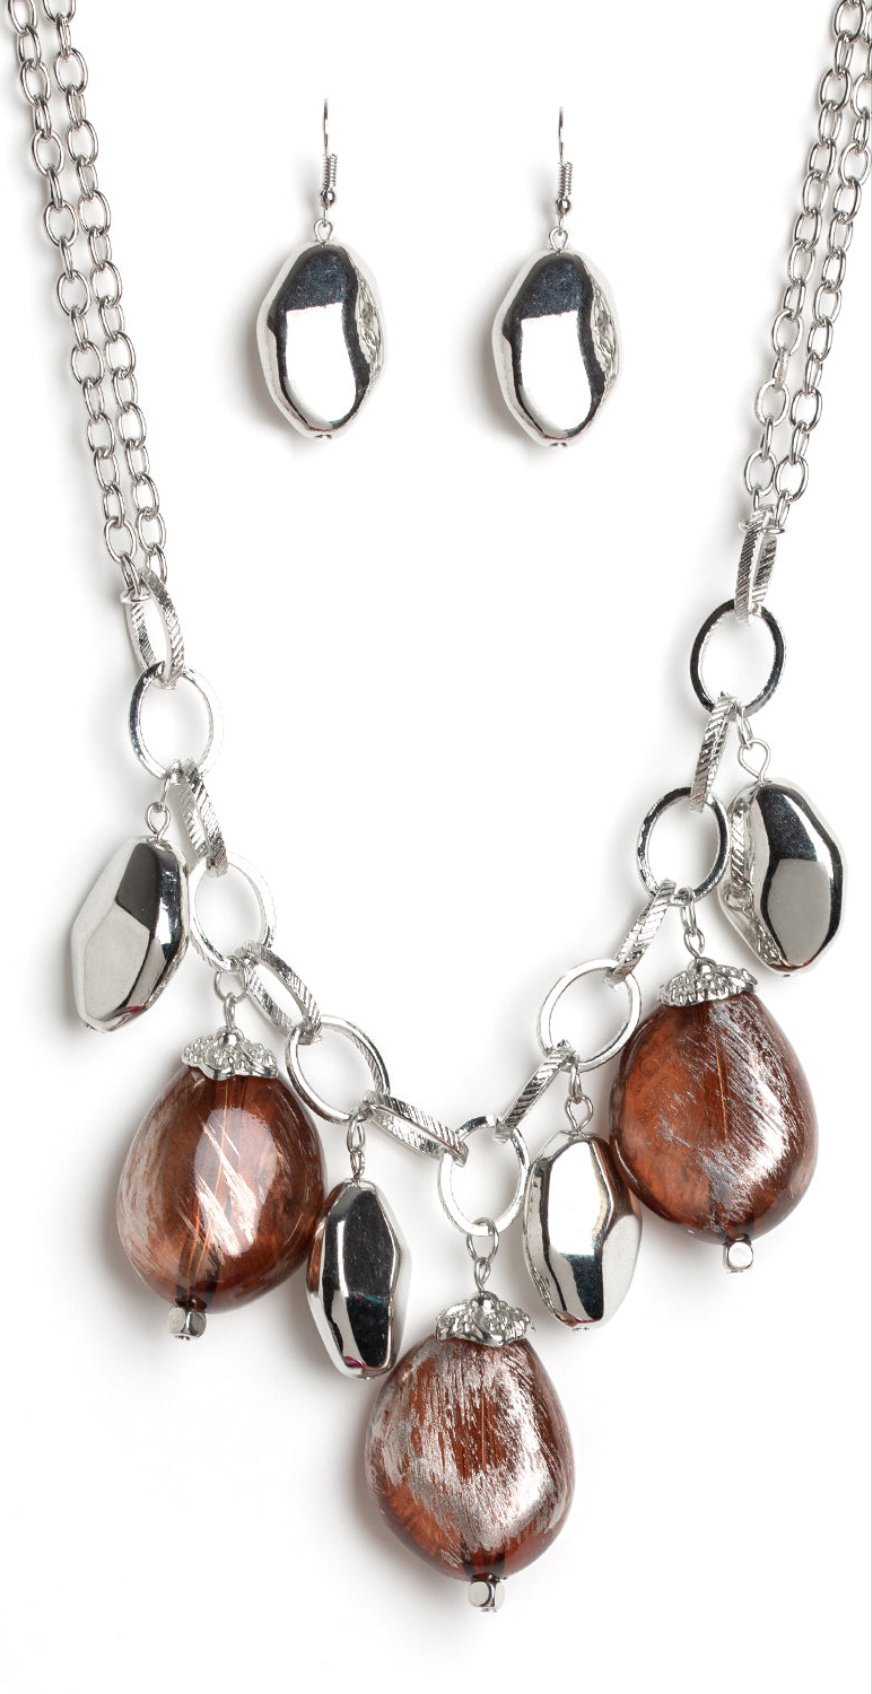 Looking Glass Glamorous Brown Necklace and Earrings